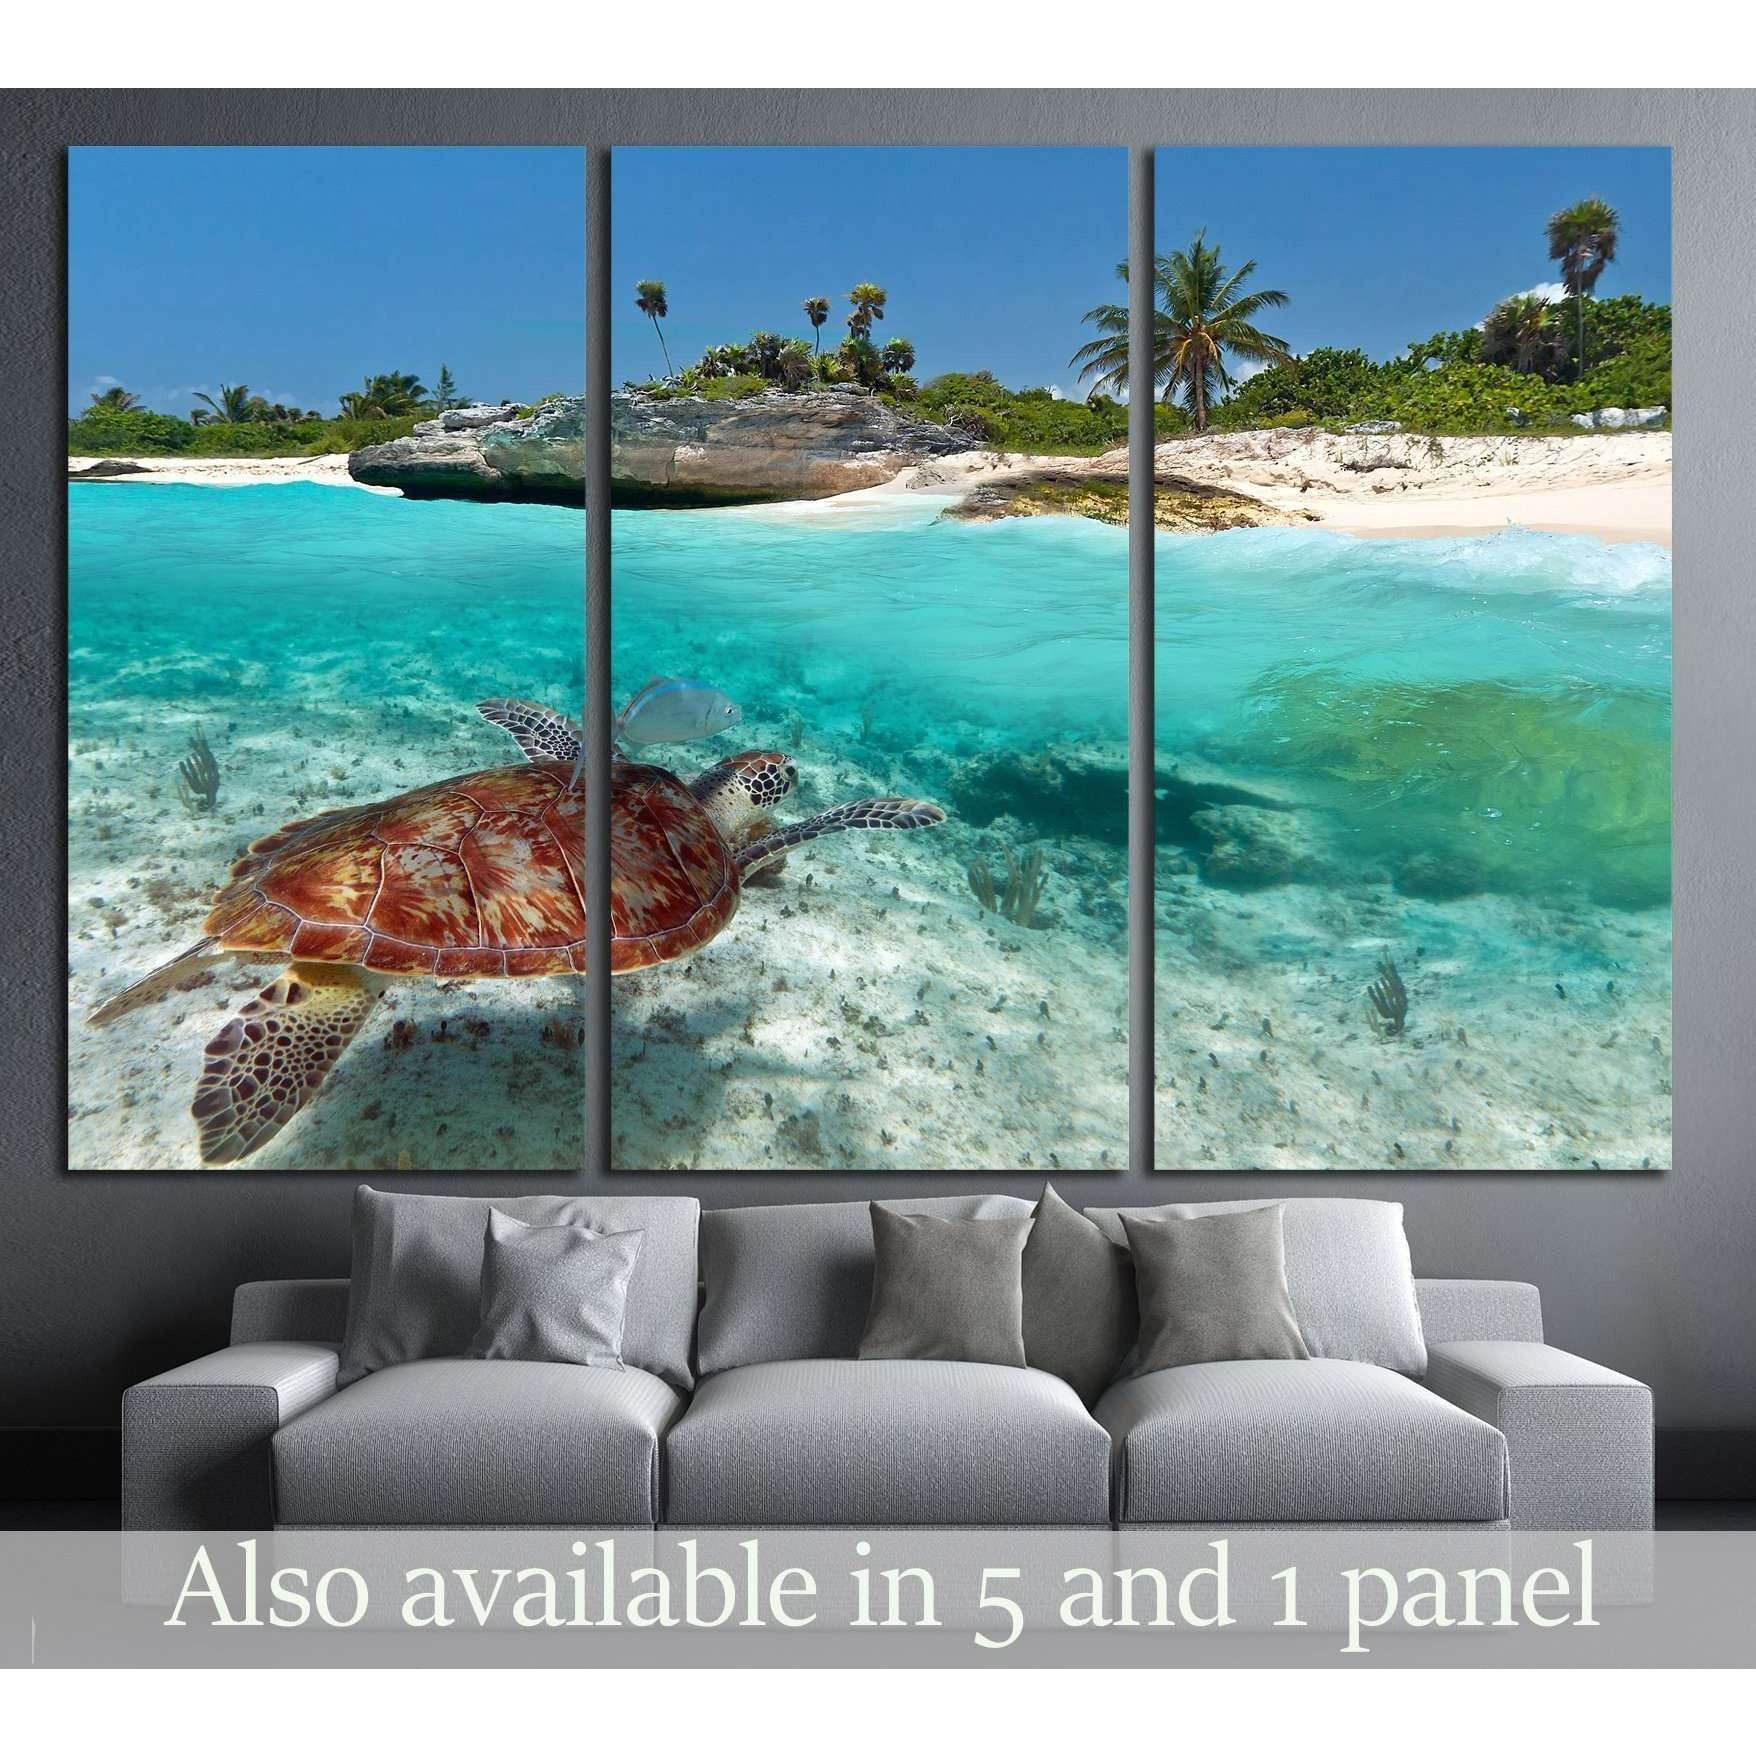 Caribbean Sea scenery with green turtle in Mexico №2502 Ready to Hang Canvas PrintThis artwork displays a vibrant canvas print depicting a turtle swimming near a sunlit tropical beach. The crystal-clear water and the lush greenery on the shore contrast wi